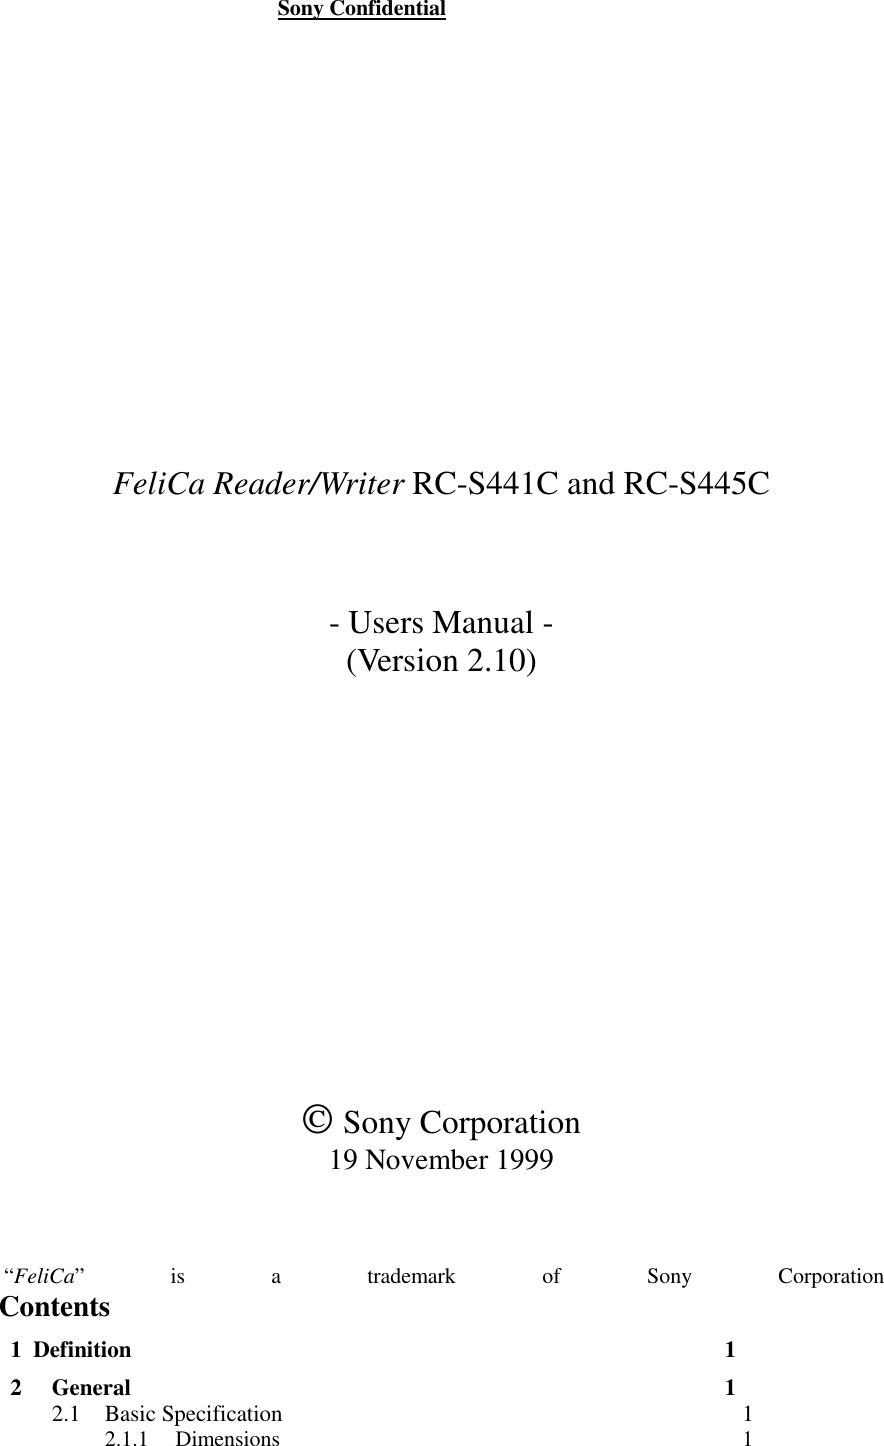                                                    Sony ConfidentialFeliCa Reader/Writer RC-S441C and RC-S445C- Users Manual -         (Version 2.10) Sony Corporation19 November 1999 “FeliCa” is a trademark of Sony CorporationContents1  Definition 12 General 12.1 Basic Specification 12.1.1 Dimensions 1